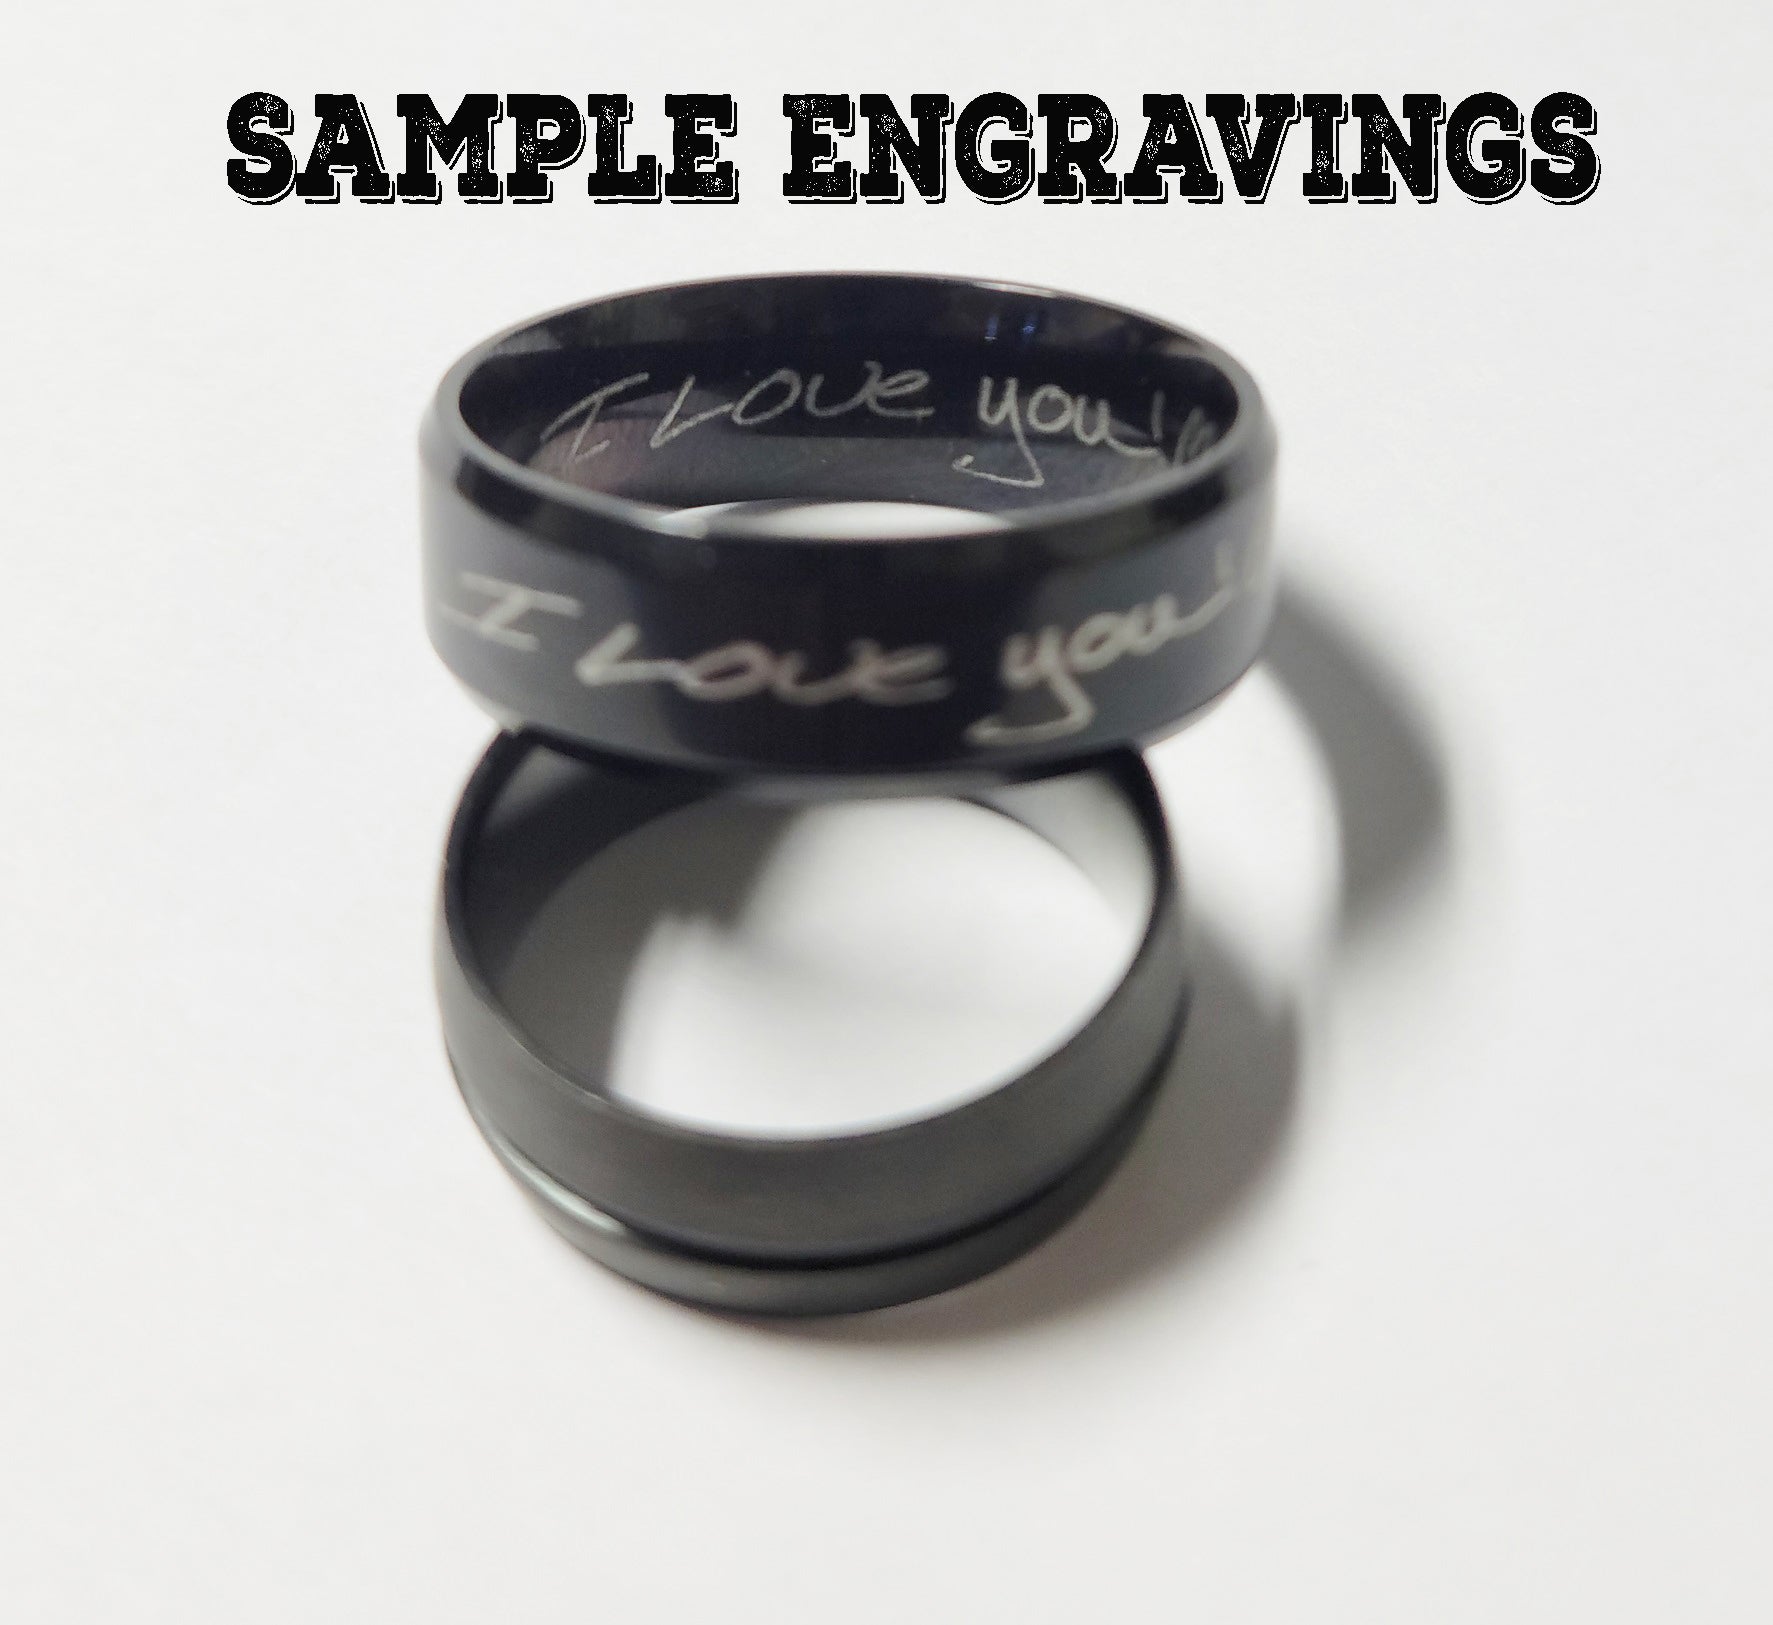 Think Engraved Promise Ring Custom Engraved Men's Brass Copper Tungsten Promise Ring - Personalized Handwriting Ring